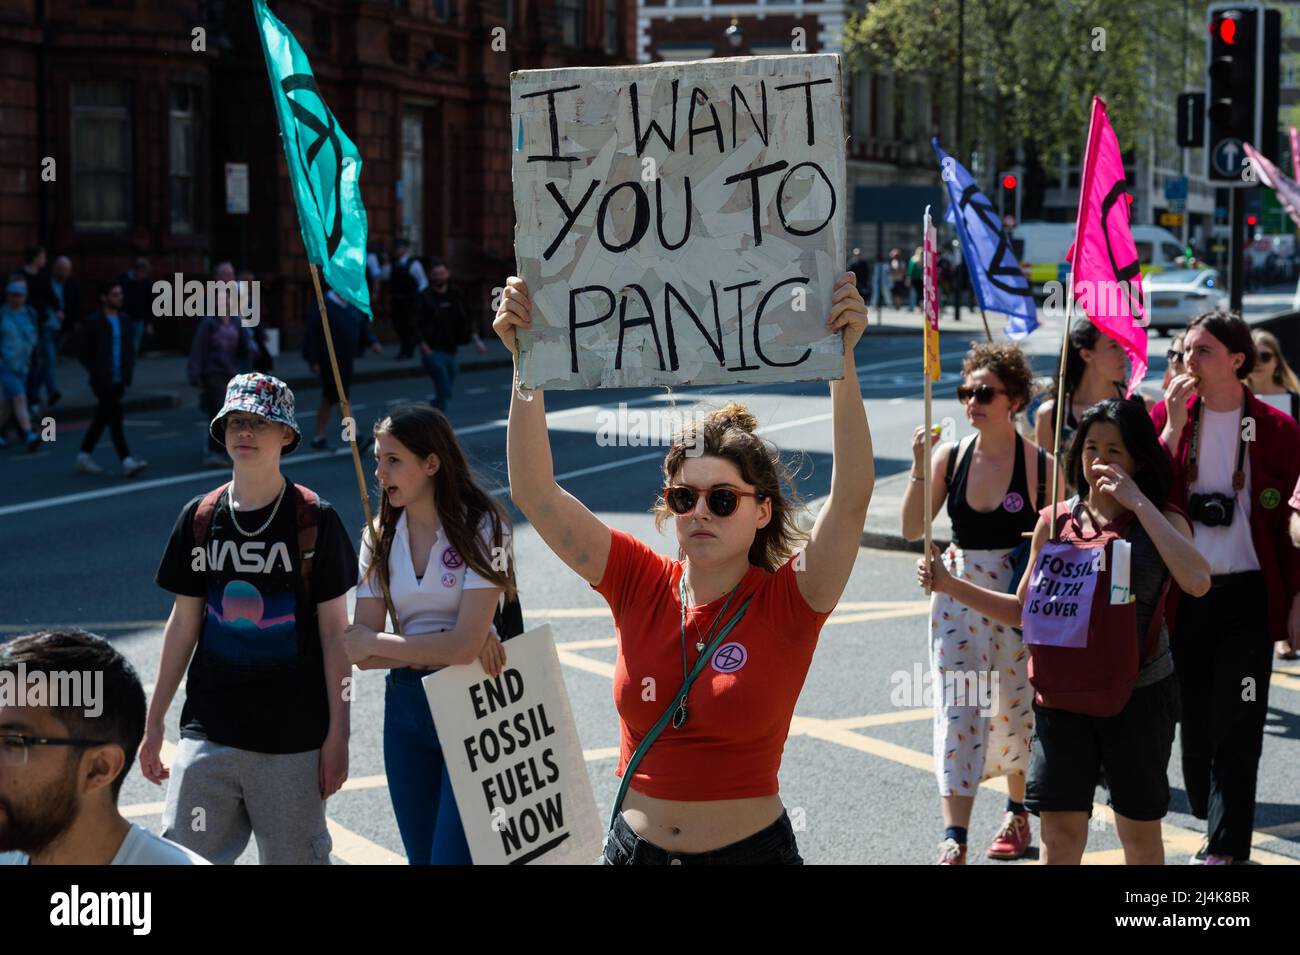 London, UK. 16th April, 2022. Activists from Extinction Rebellion march along Marylebone Road on the eight day of protests and civil disobedience actions to demand an immediate stop to all new fossil fuel infrastructure by the British government amid climate crisis and ecological emergency. Credit: Wiktor Szymanowicz/Alamy Live News Stock Photo